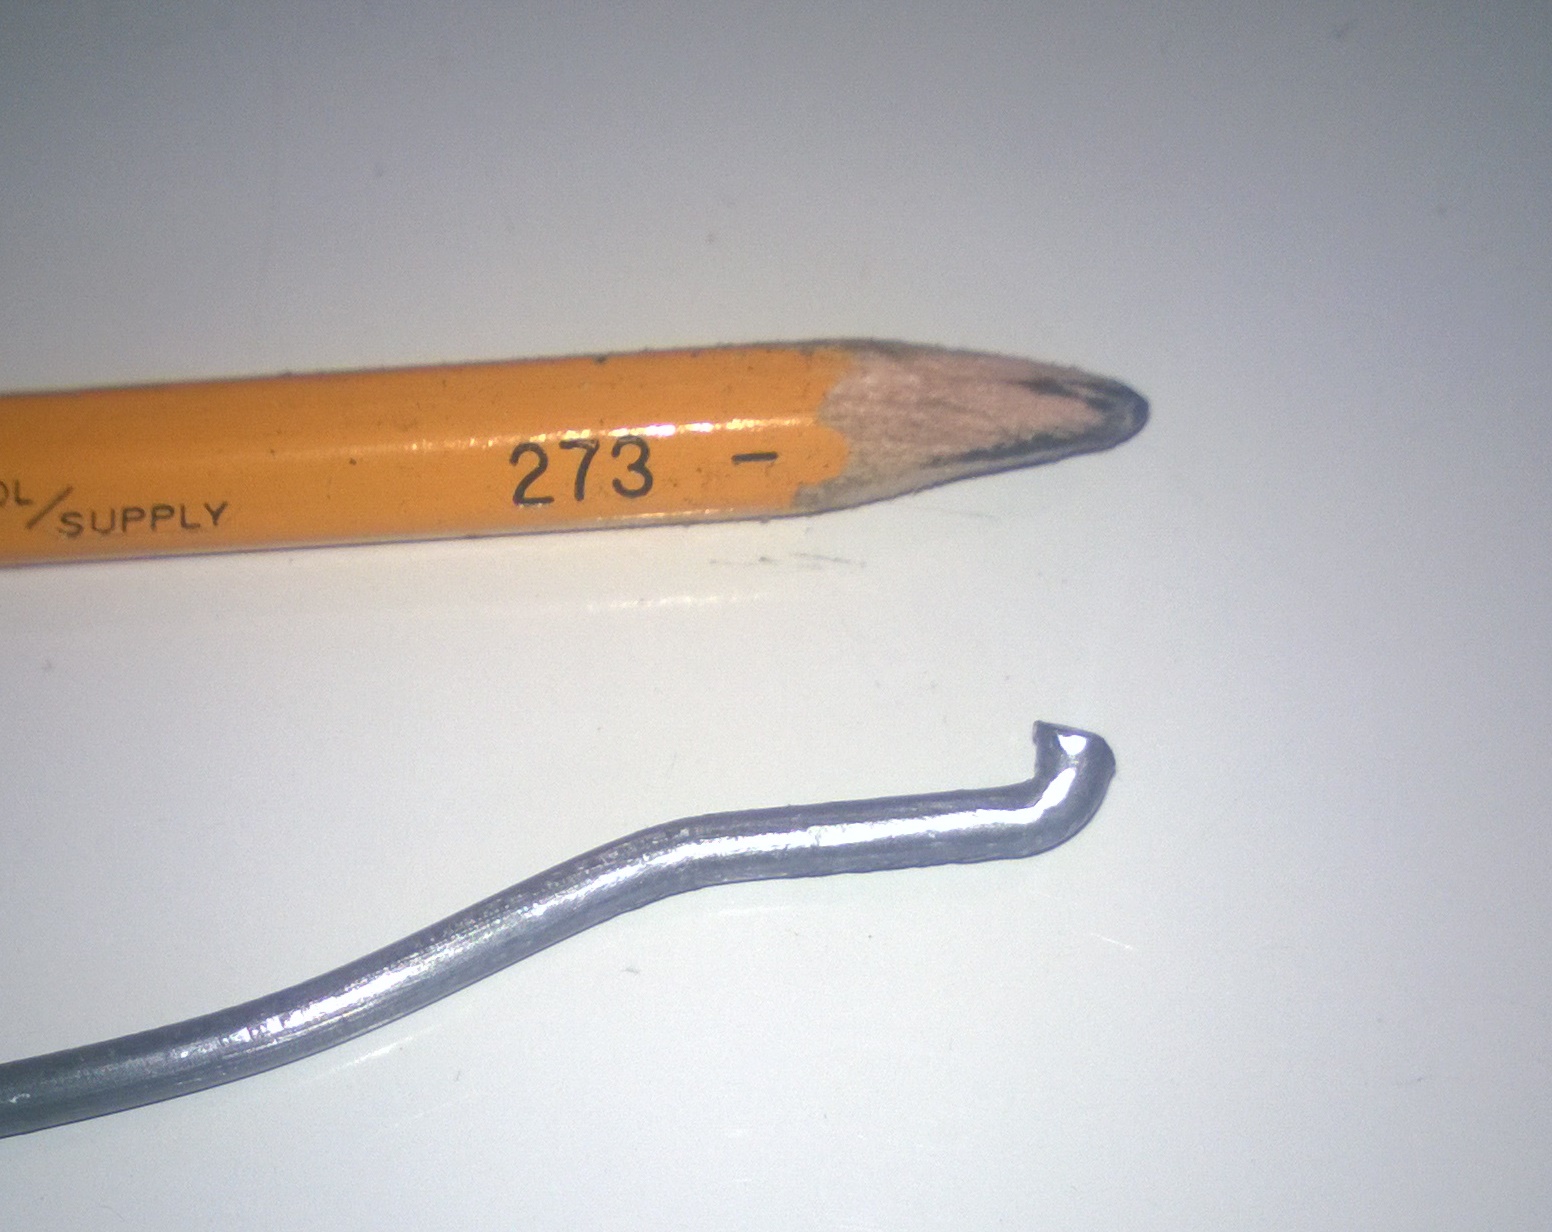 Again..Pencil Tip is for Scale